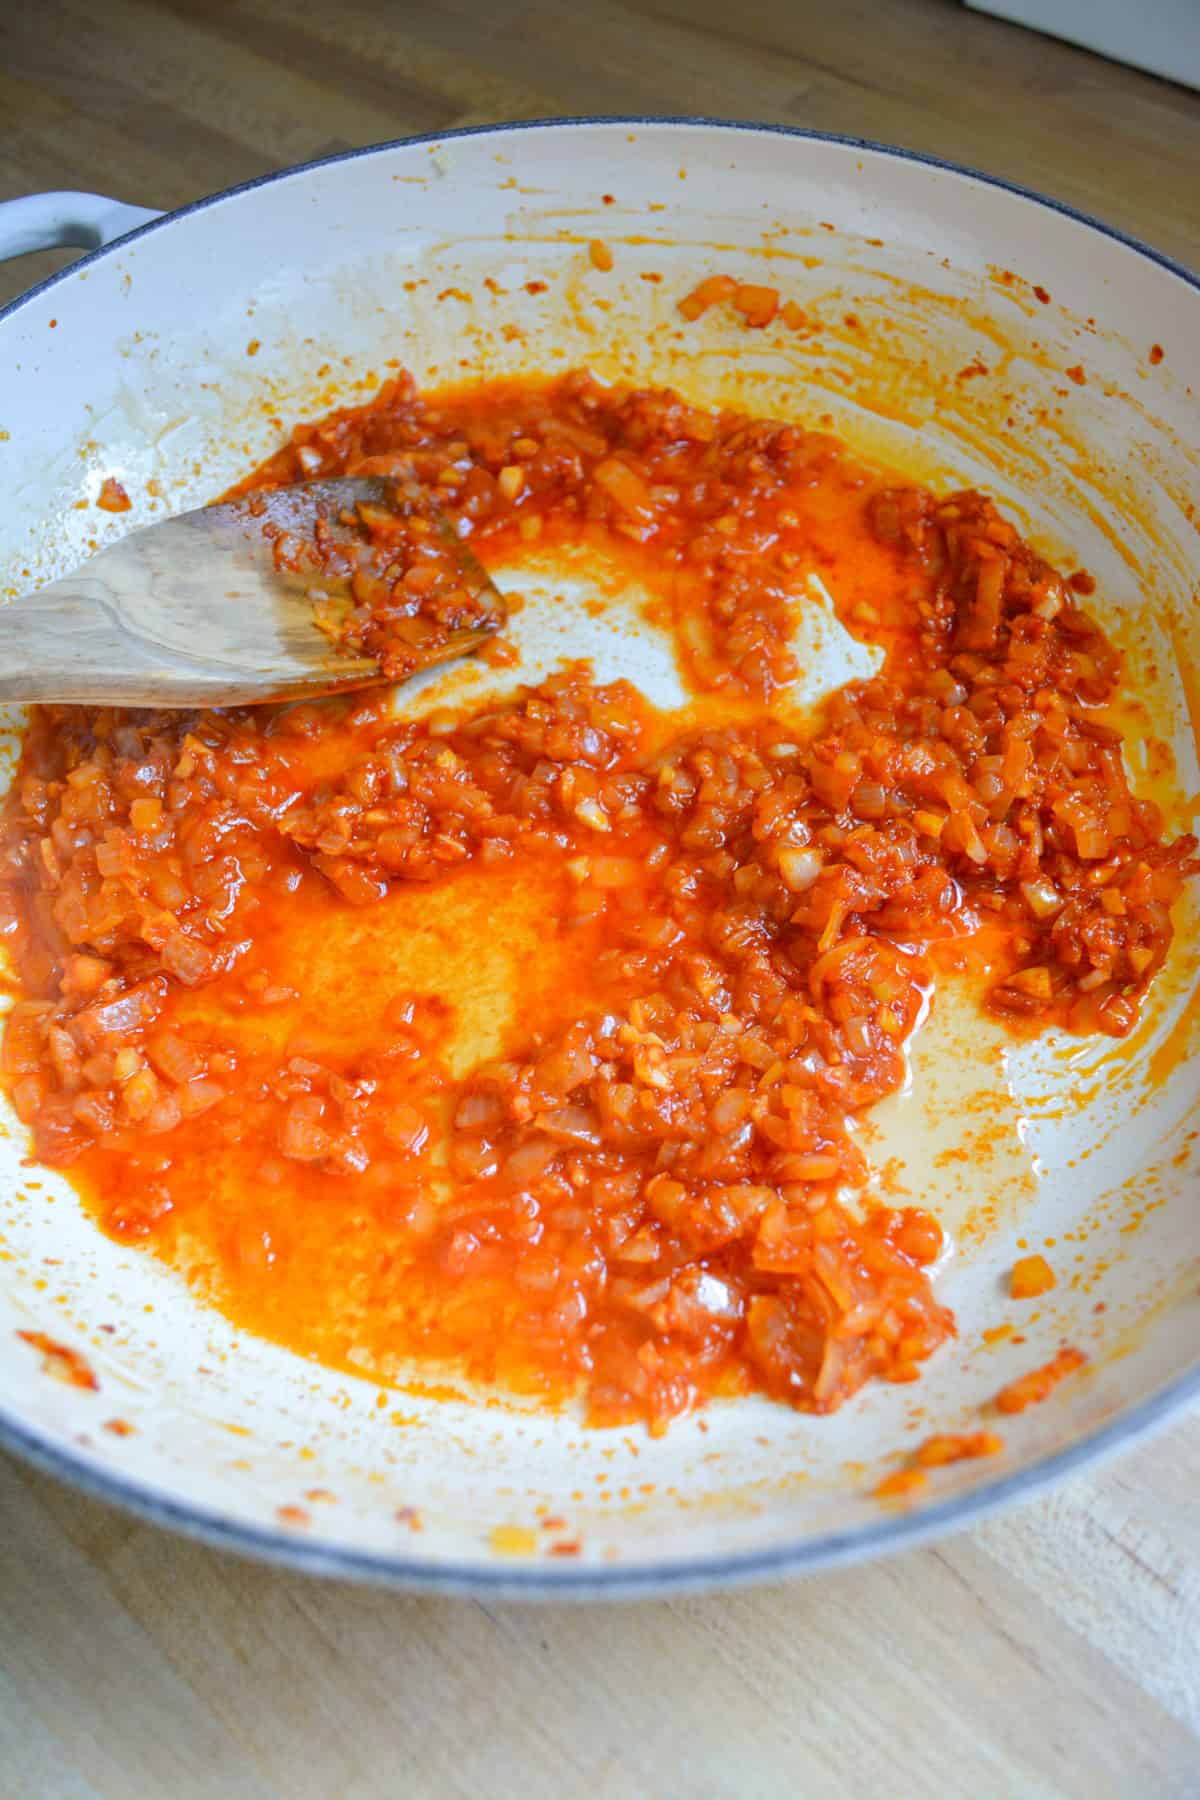 Vodka added into the onion and tomato paste mixture in a skillet with a wooden spoon on the top left.